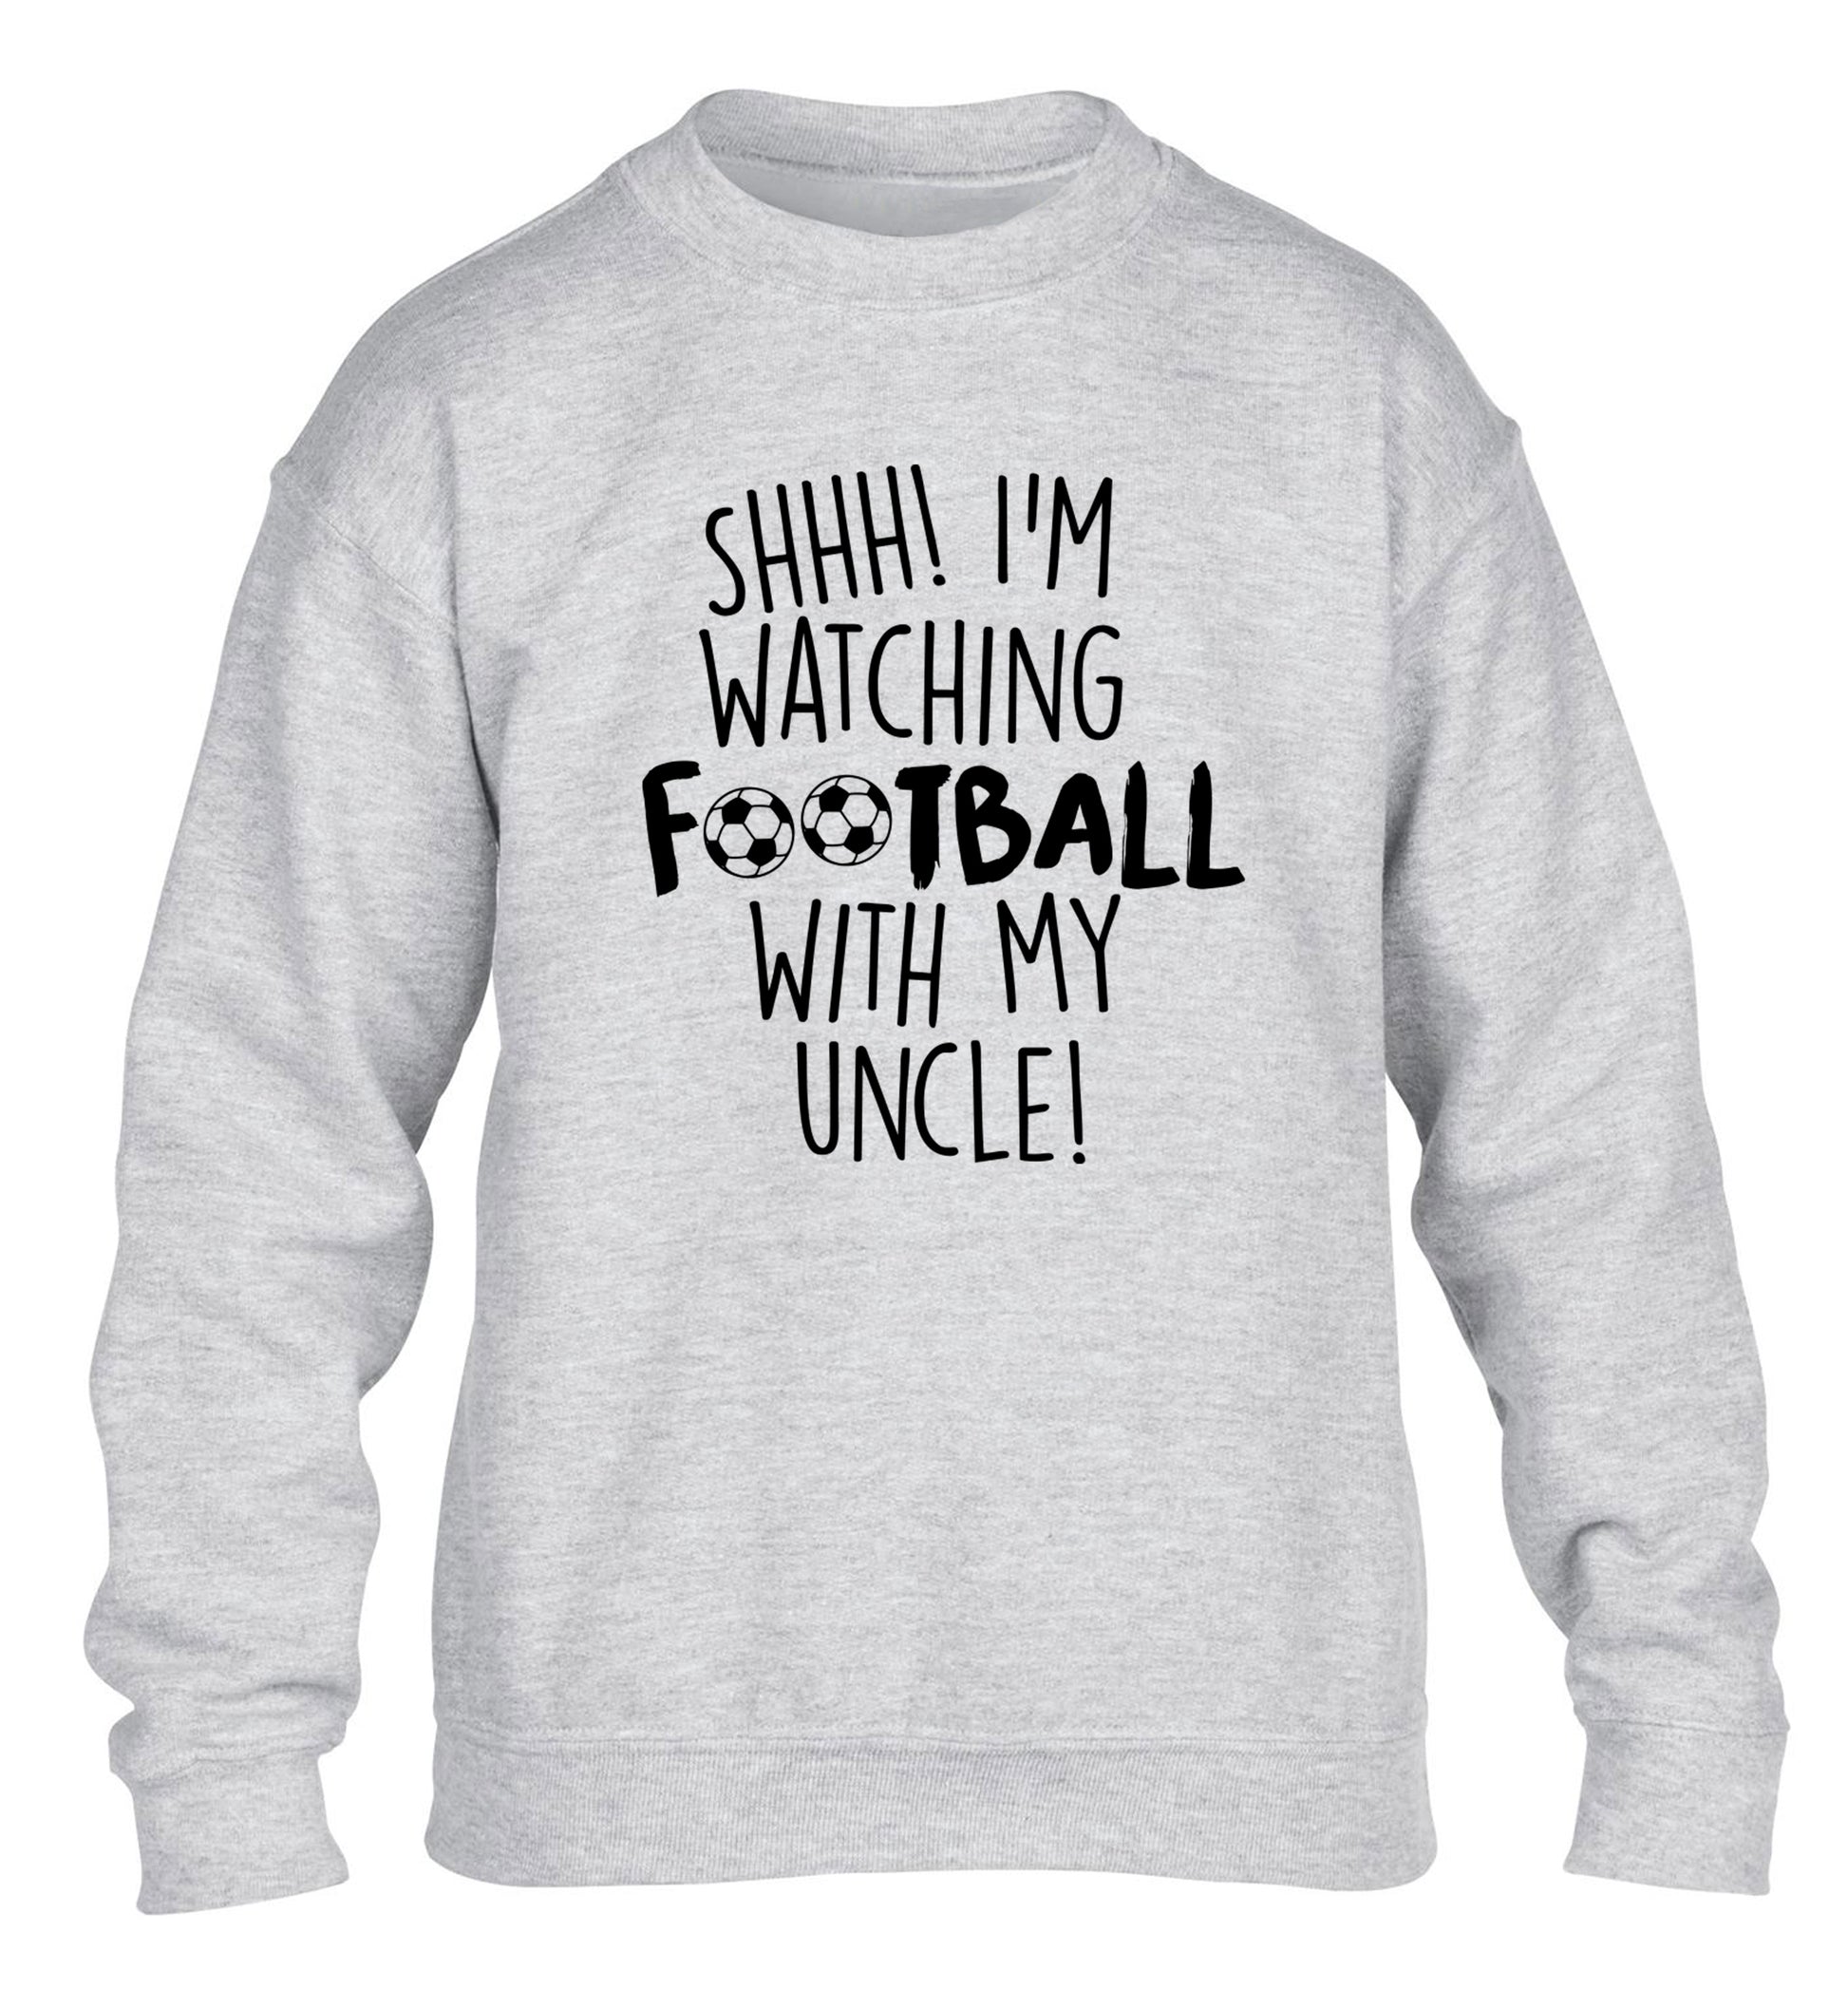 Shhh I'm watching football with my uncle children's grey sweater 12-14 Years